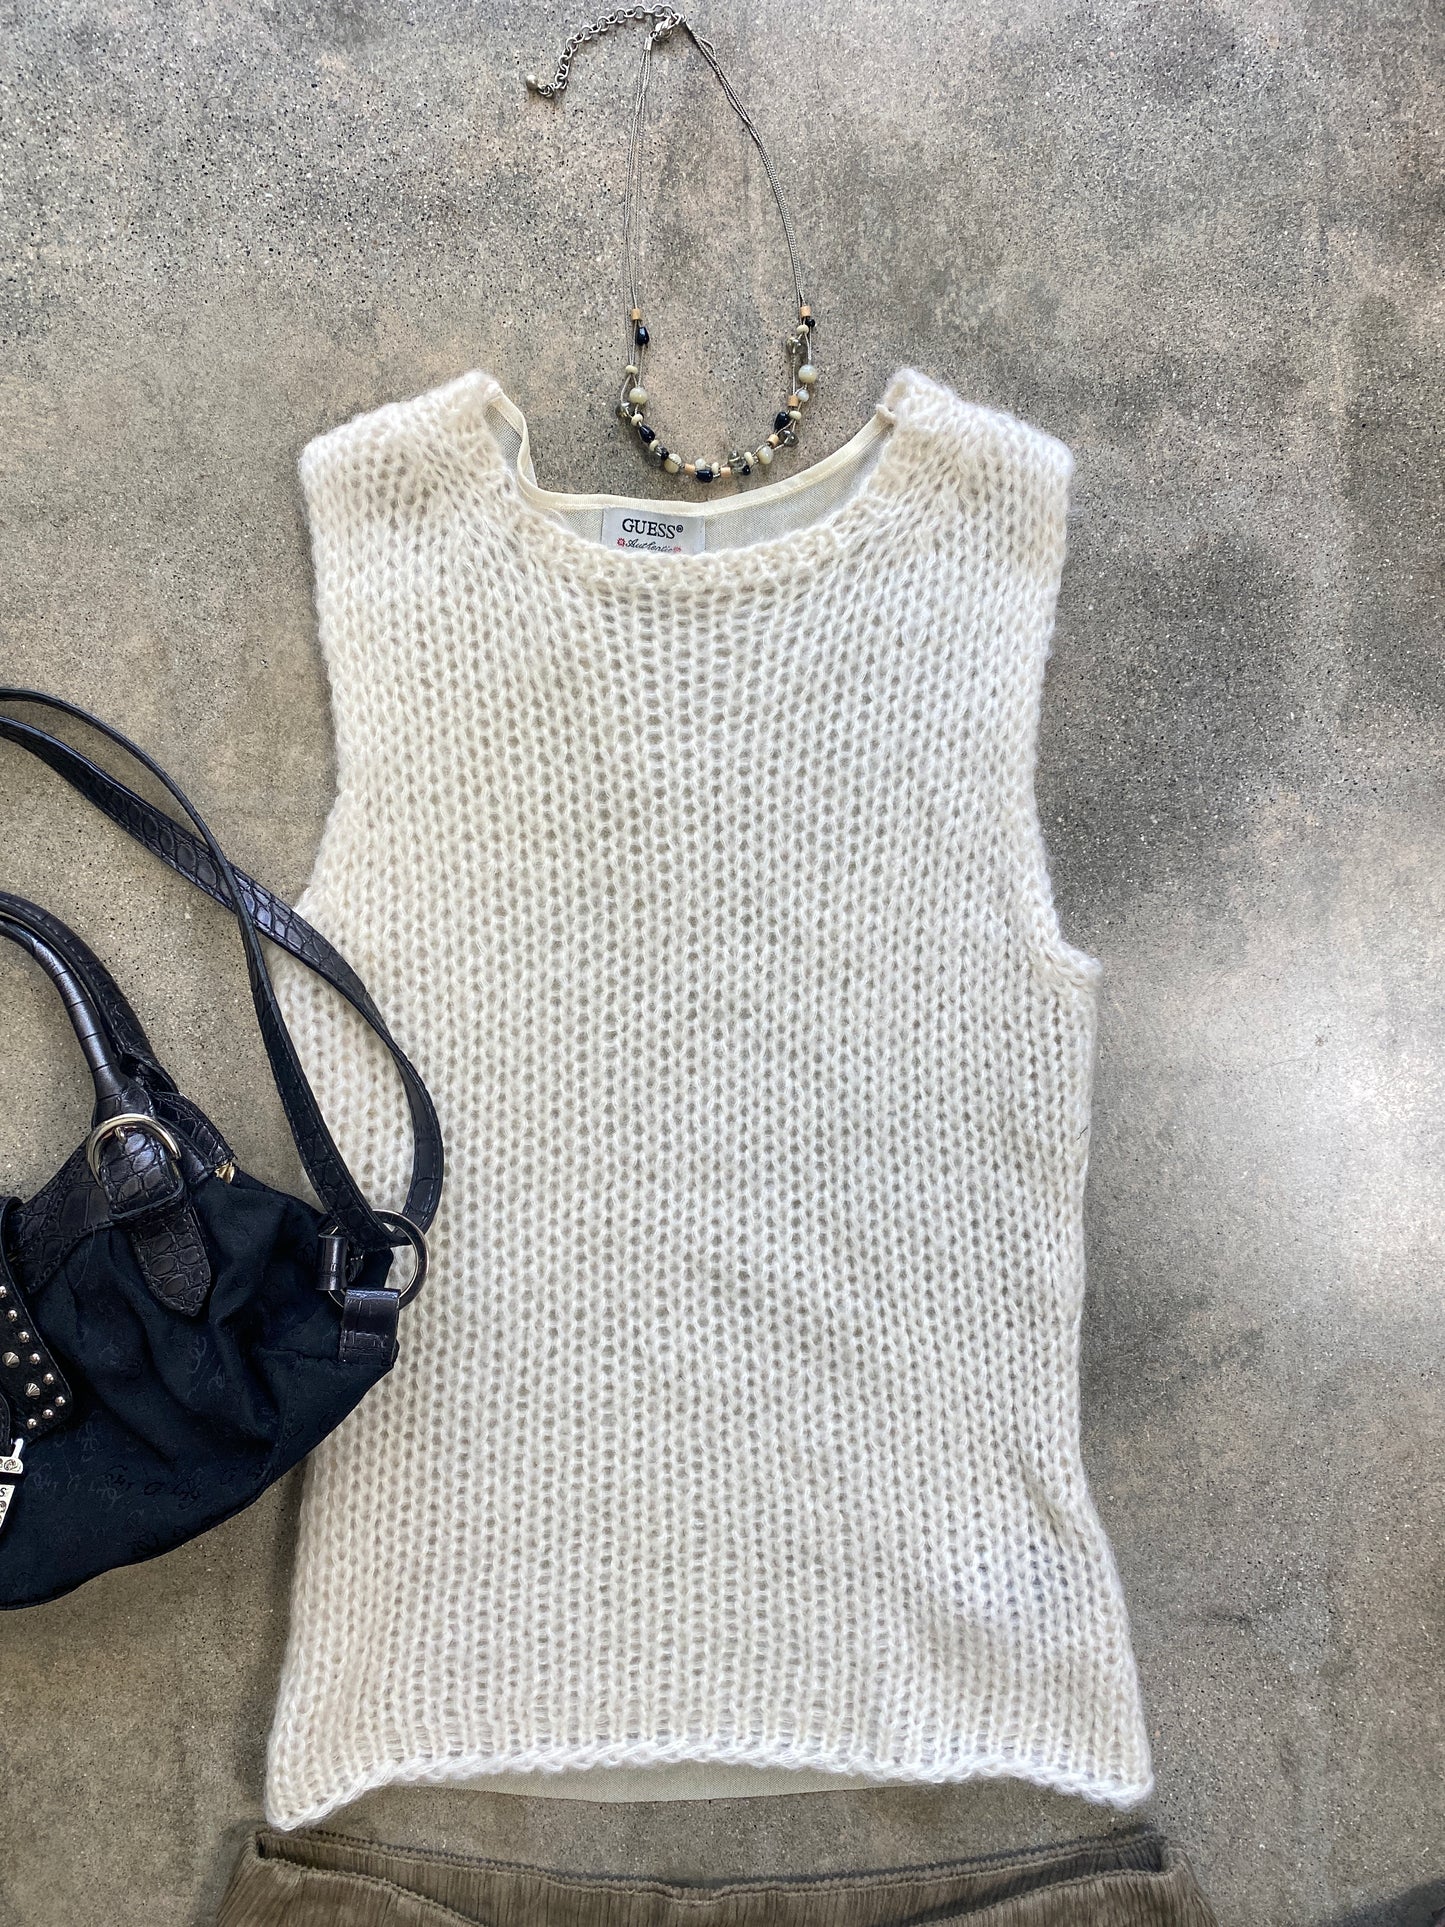 00’s Guess Cream Knit Tank Top